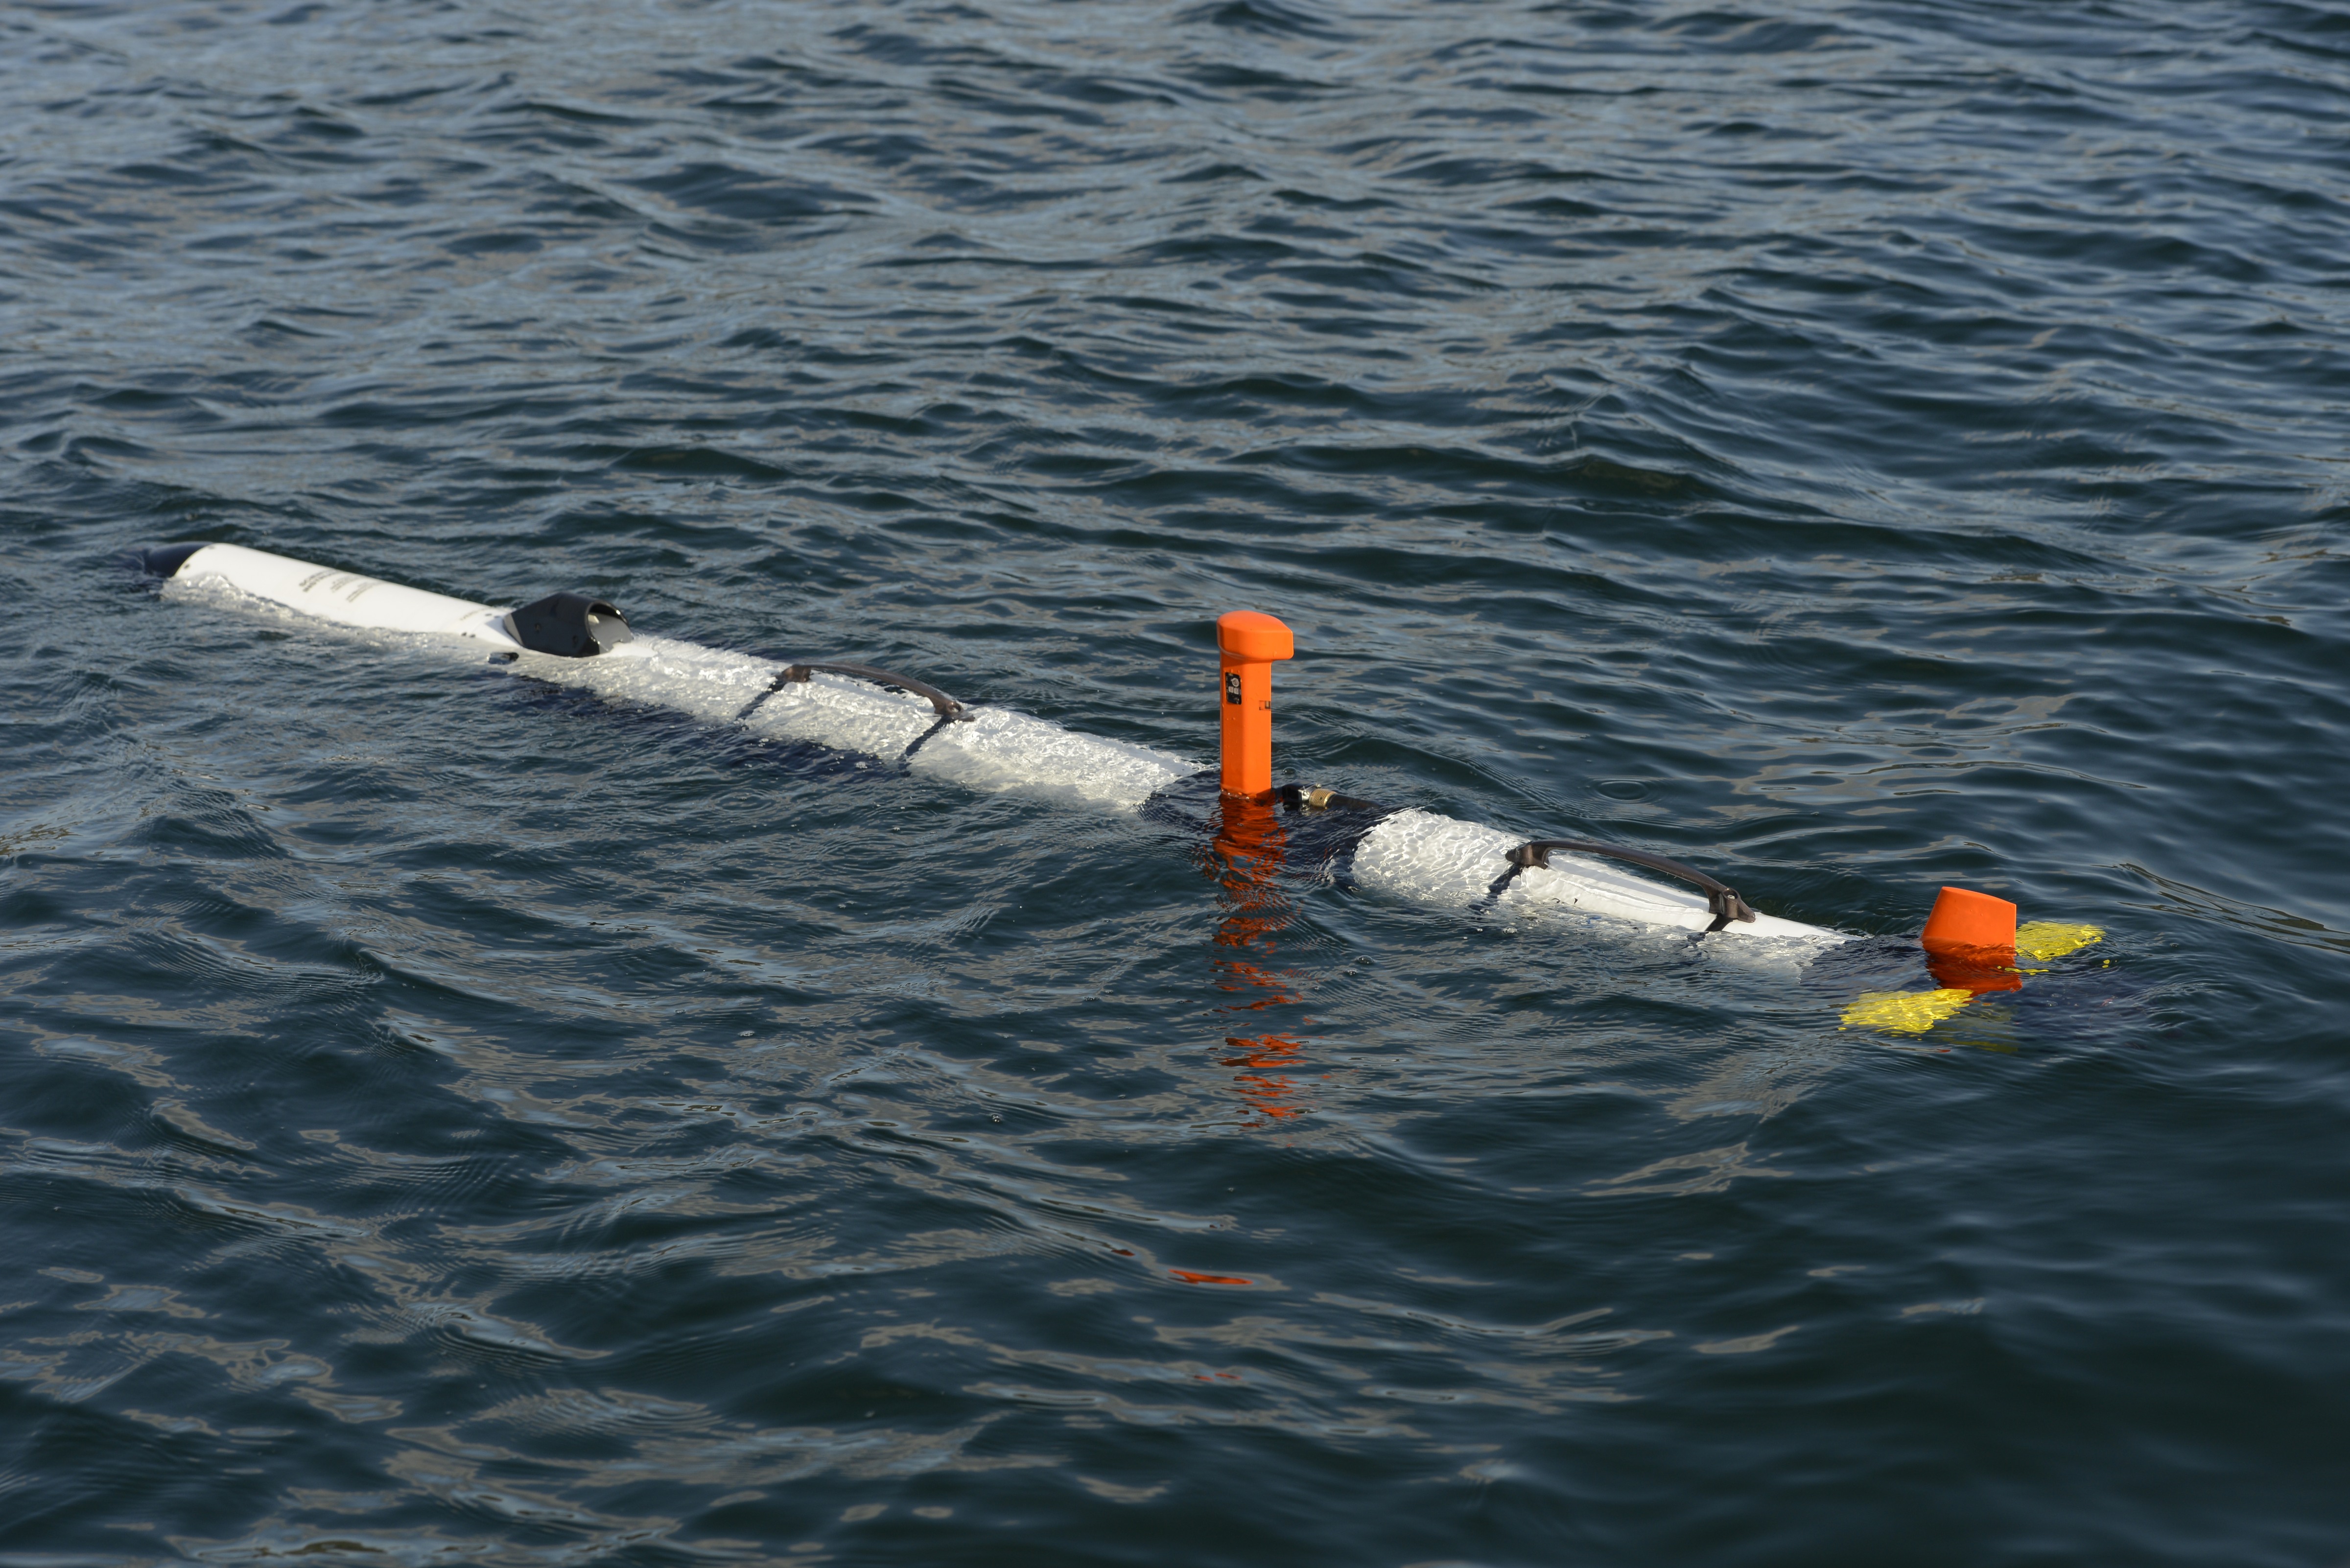 The Iver3 unmanned underwater vehicle waits on the surface before the start of an autonomous mission. Photo by Janice Lang, DRDC